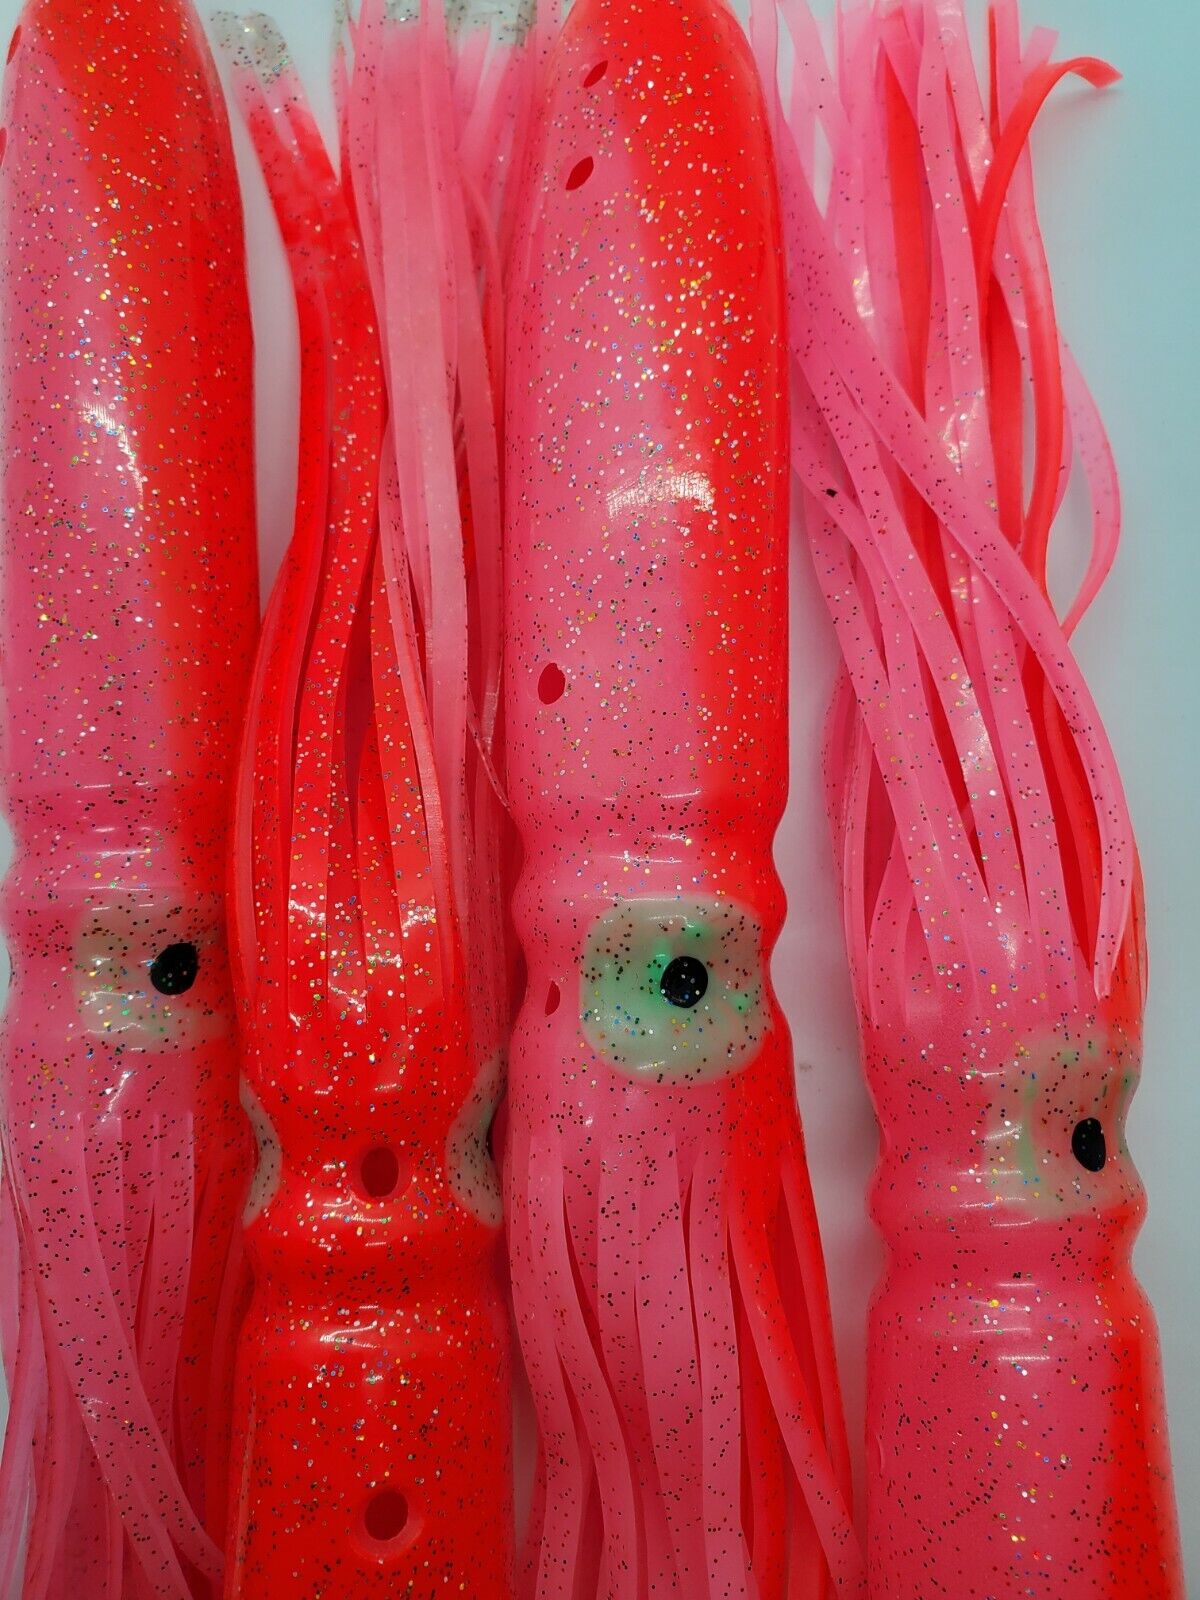 11.8 Bulb Octopus Squid Skirts Soft Trolling Lure Bait Saltwater